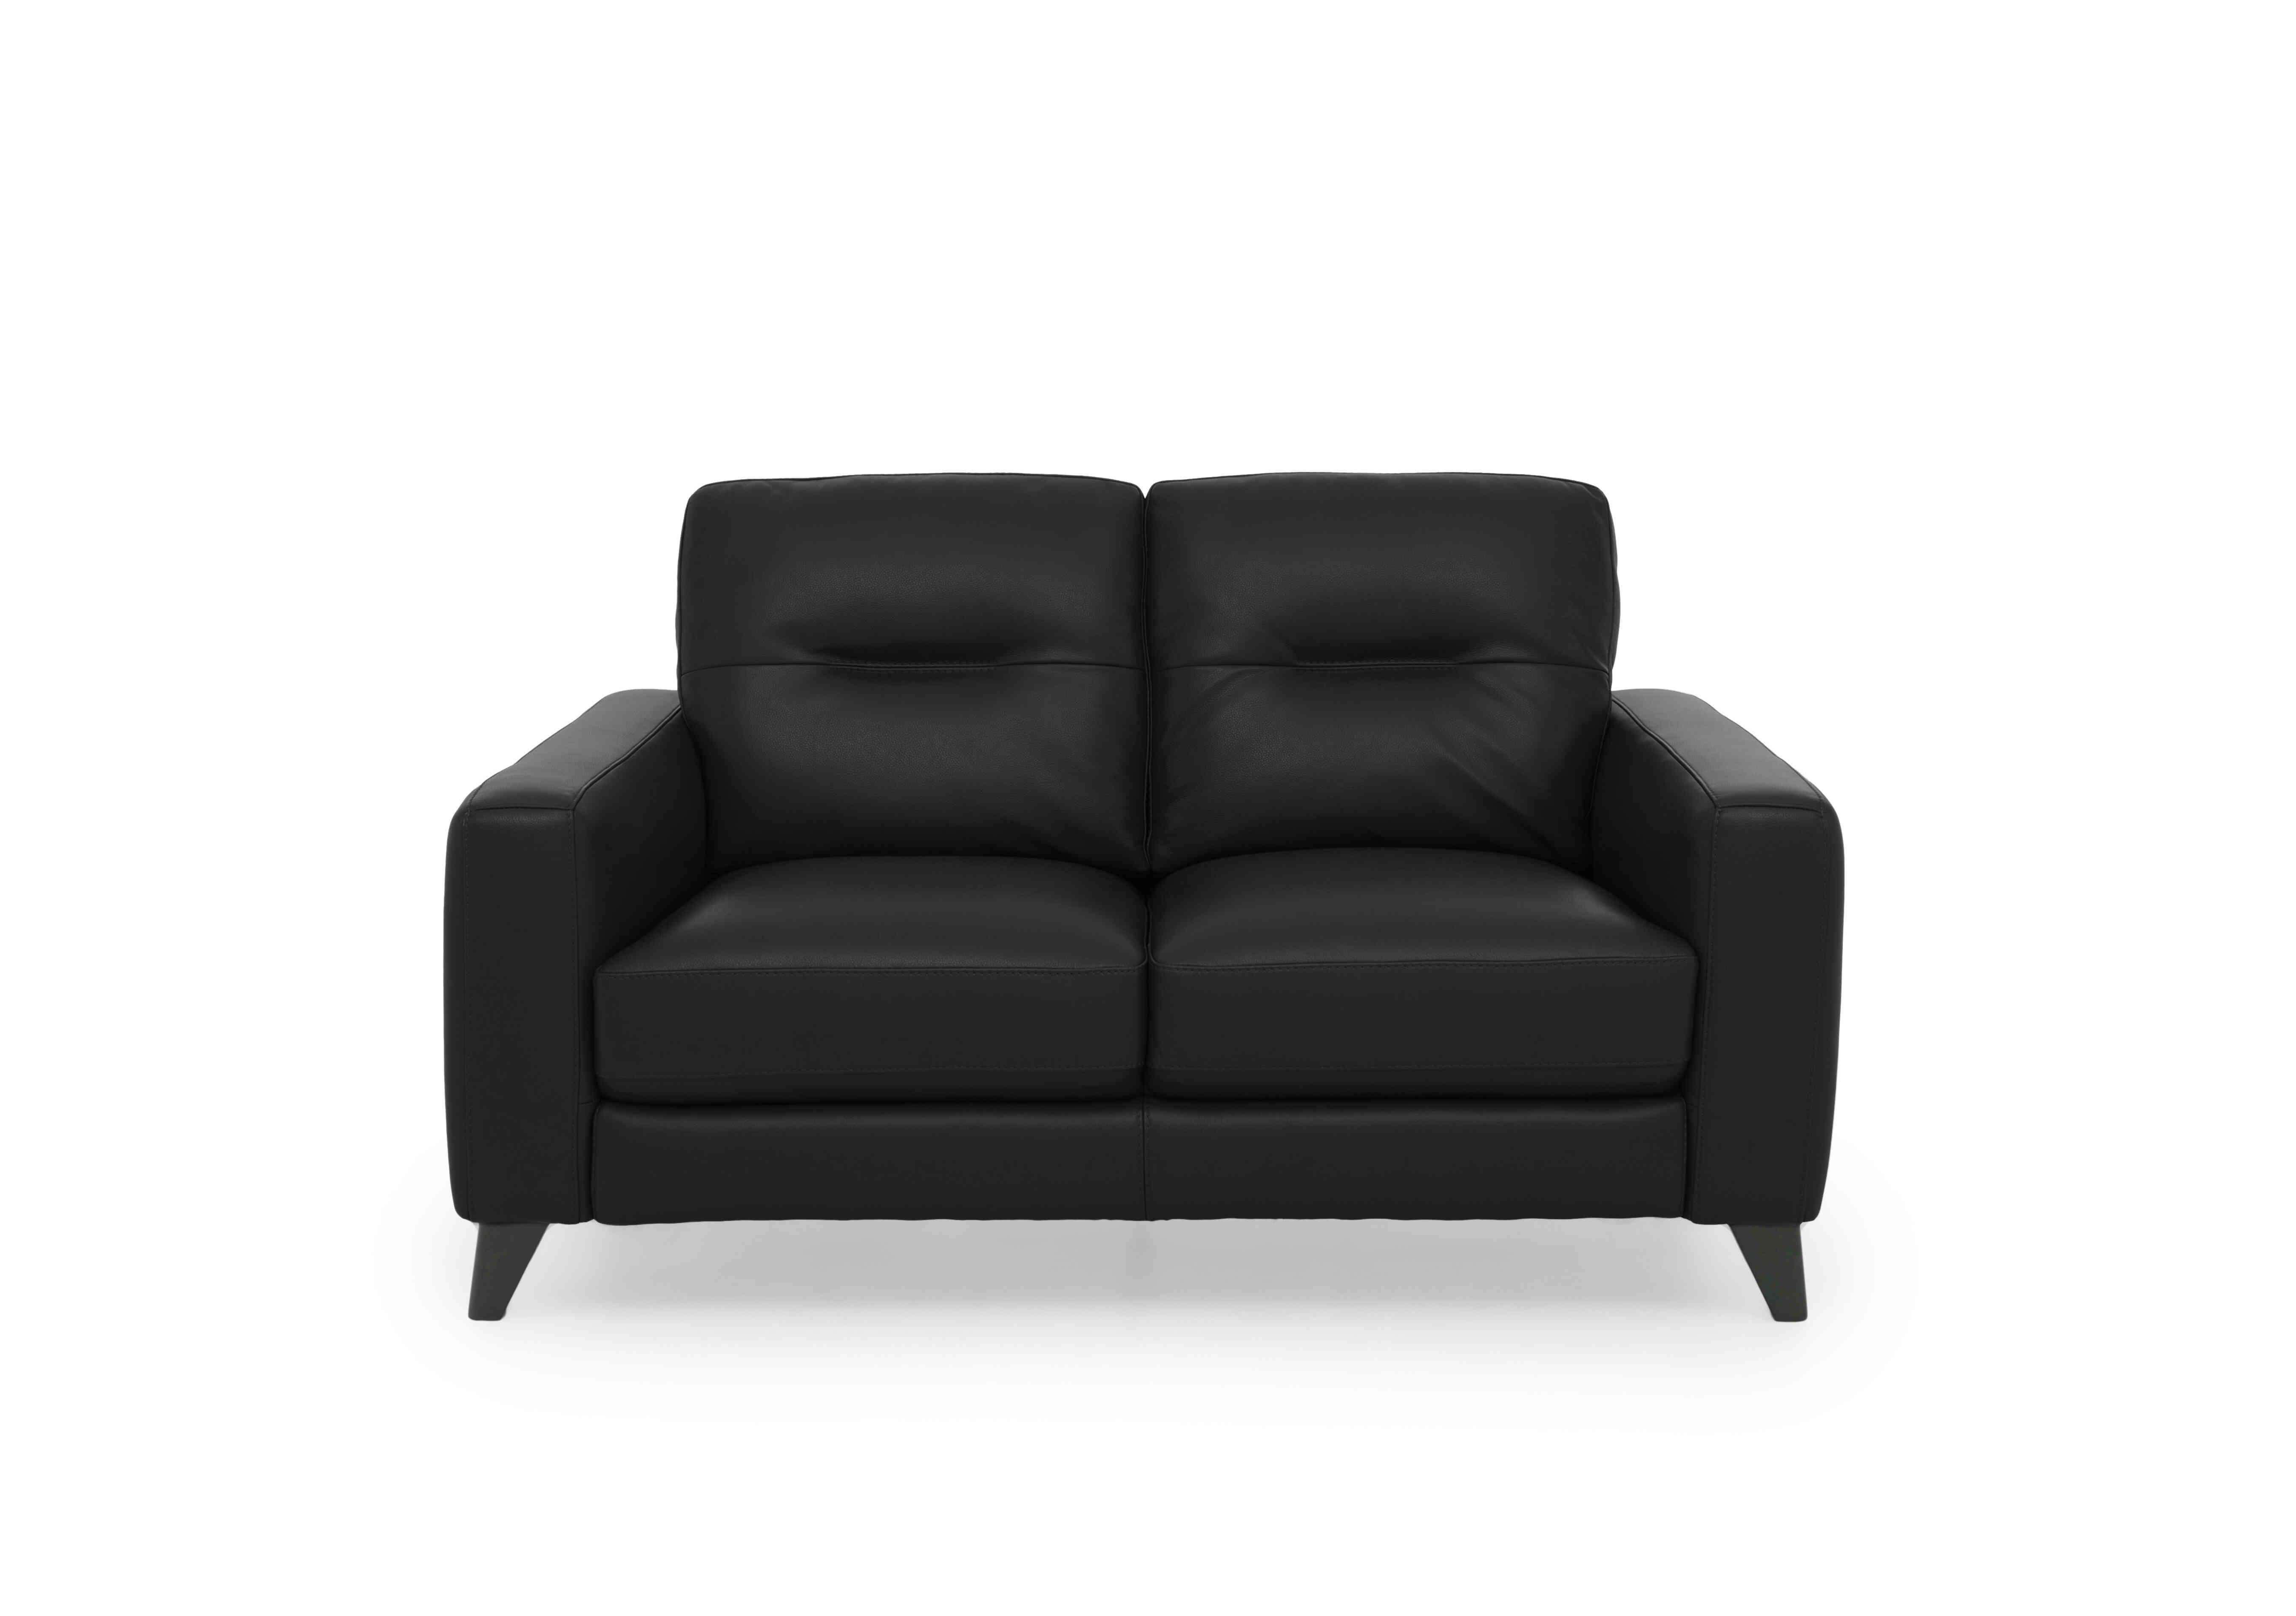 Jules 2 Seater Leather Sofa in An-671b Black on Furniture Village